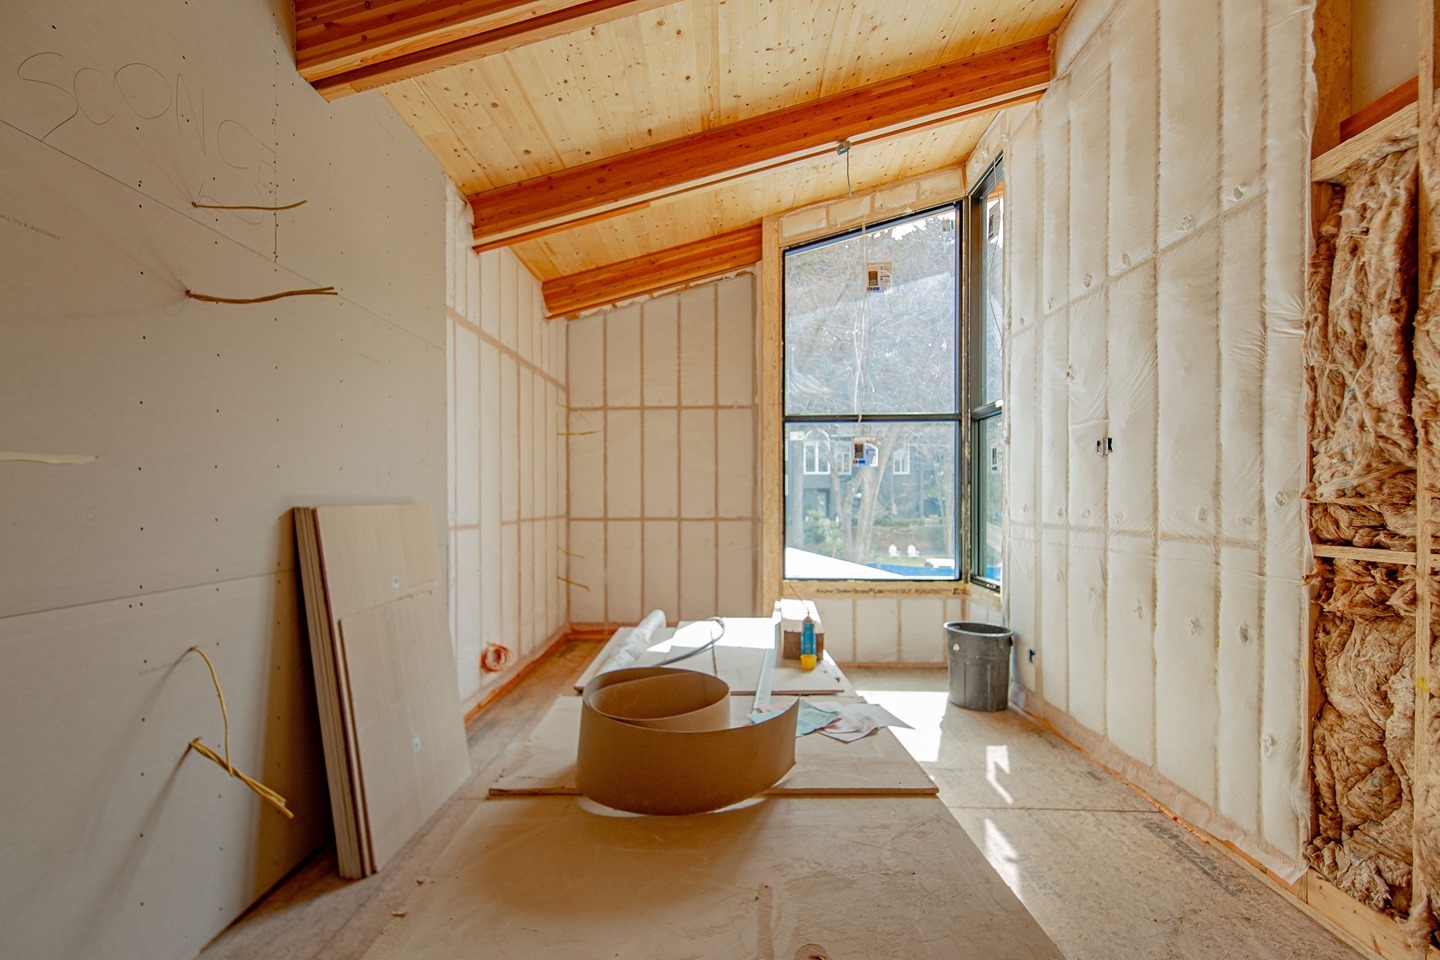 Site of this home's future bunk room! ⁠
With those windows and that ceiling, it's already a stunner.⁠
⁠
Architect+Design @breckstudio⁠
Photo cred @caseychap